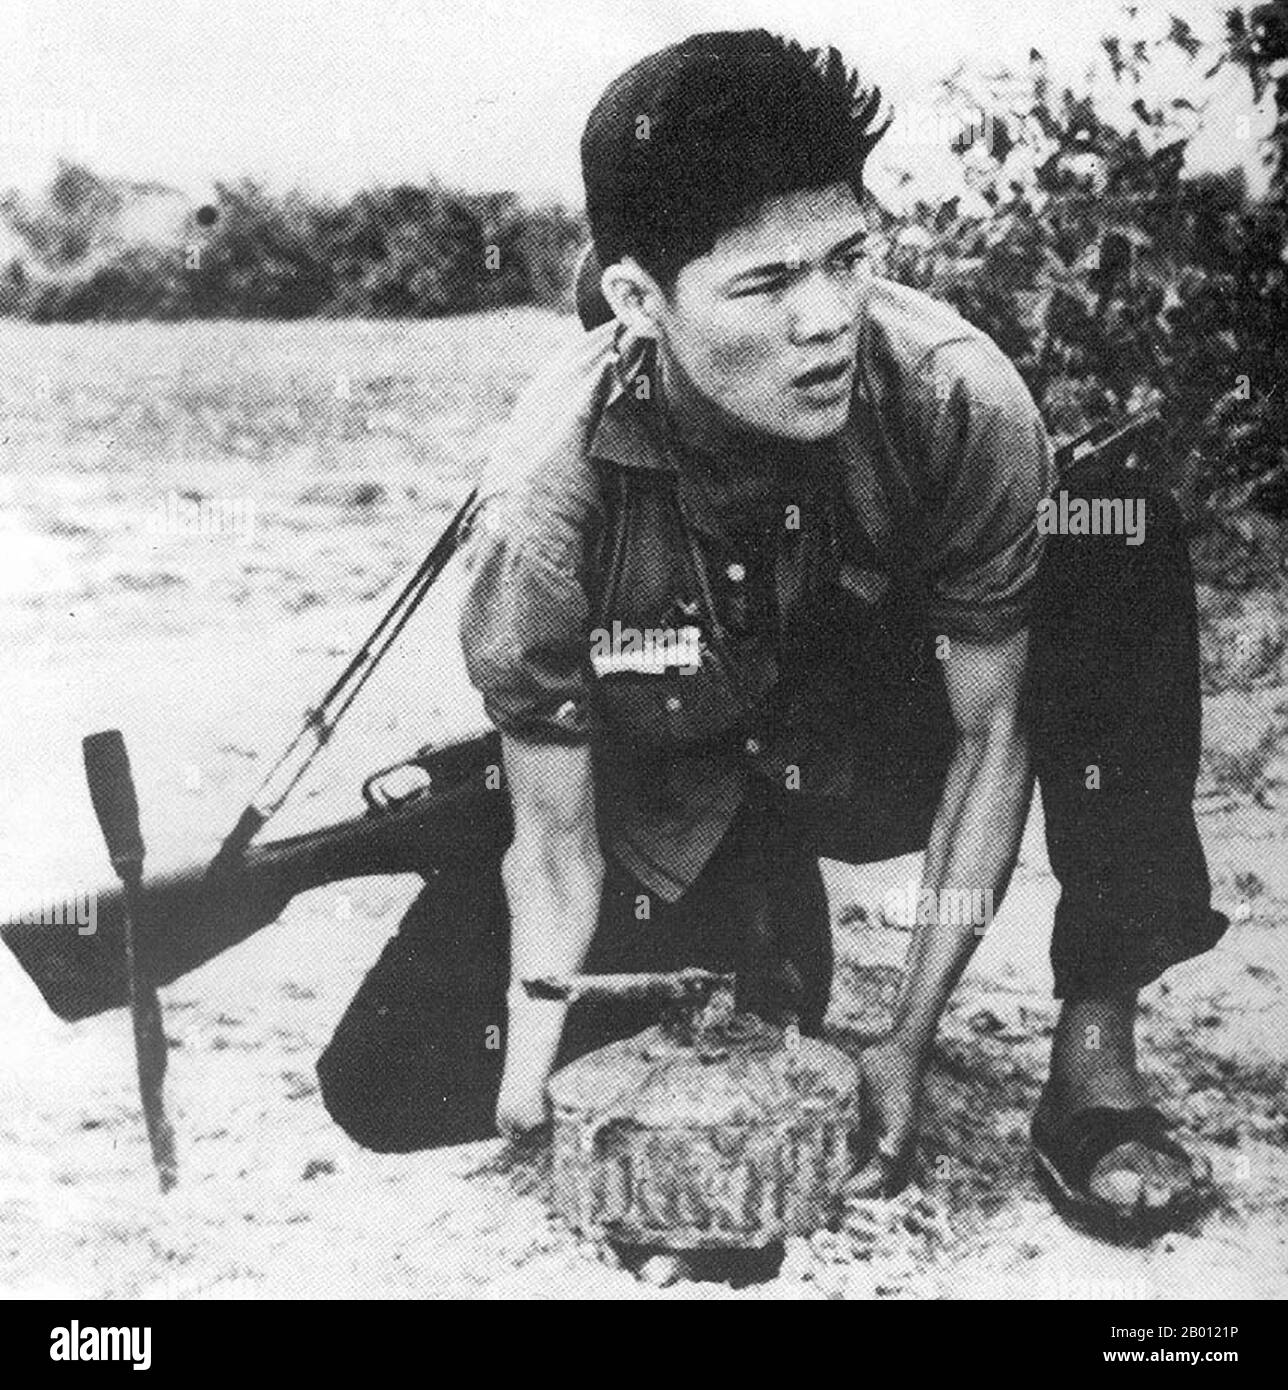 Vietnam: An NLF guerrilla posing laying a land mine for a propaganda photograph, c. 1966.  The Vietcong, or the National Front for the Liberation of South Vietnam (NLF), was a political organization and army in South Vietnam and Cambodia that fought the United States and South Vietnamese governments during the Vietnam War (1955–1975). It had both guerrilla and regular army units, as well as a network of cadres who organized peasants in the territory it controlled. Many soldiers were recruited in South Vietnam, but others were attached to the People's Army of Vietnam (PAVN). Stock Photo